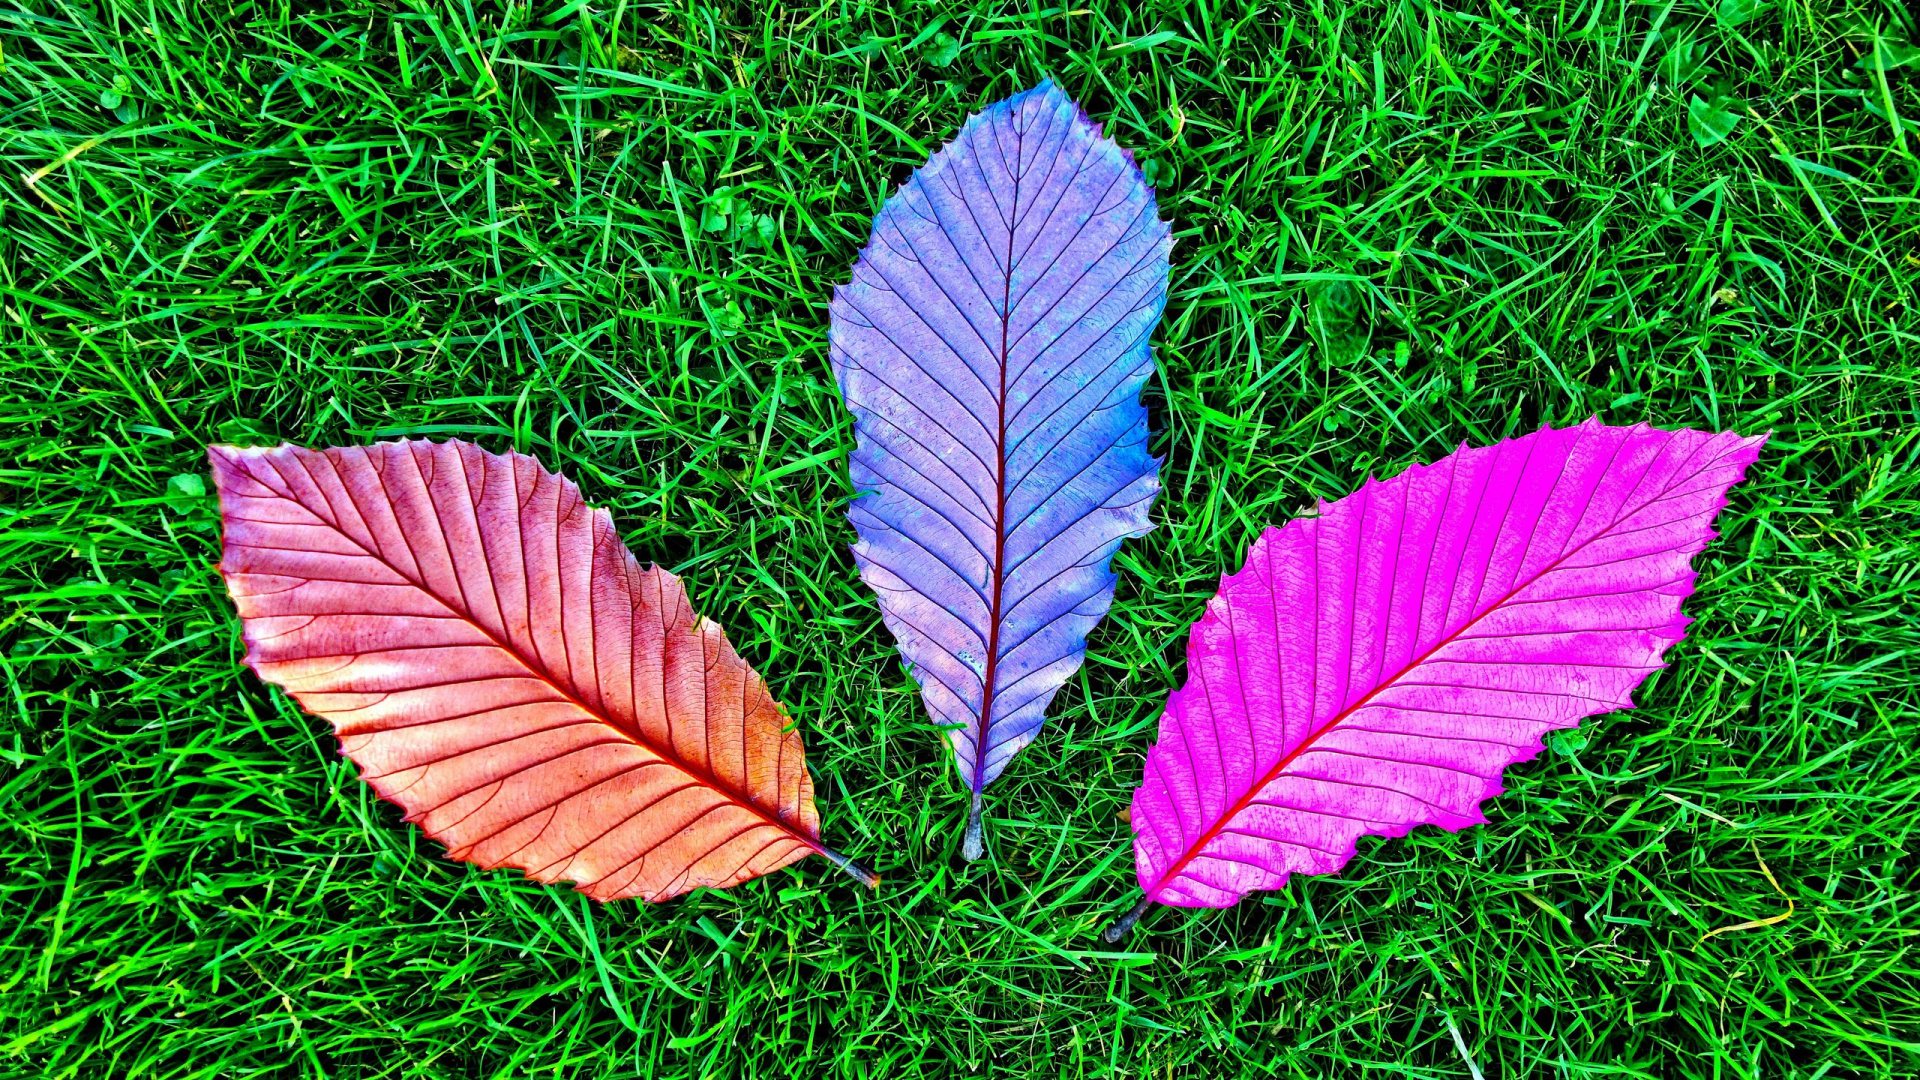 Purple and White Leaf on Green Grass. Wallpaper in 1920x1080 Resolution